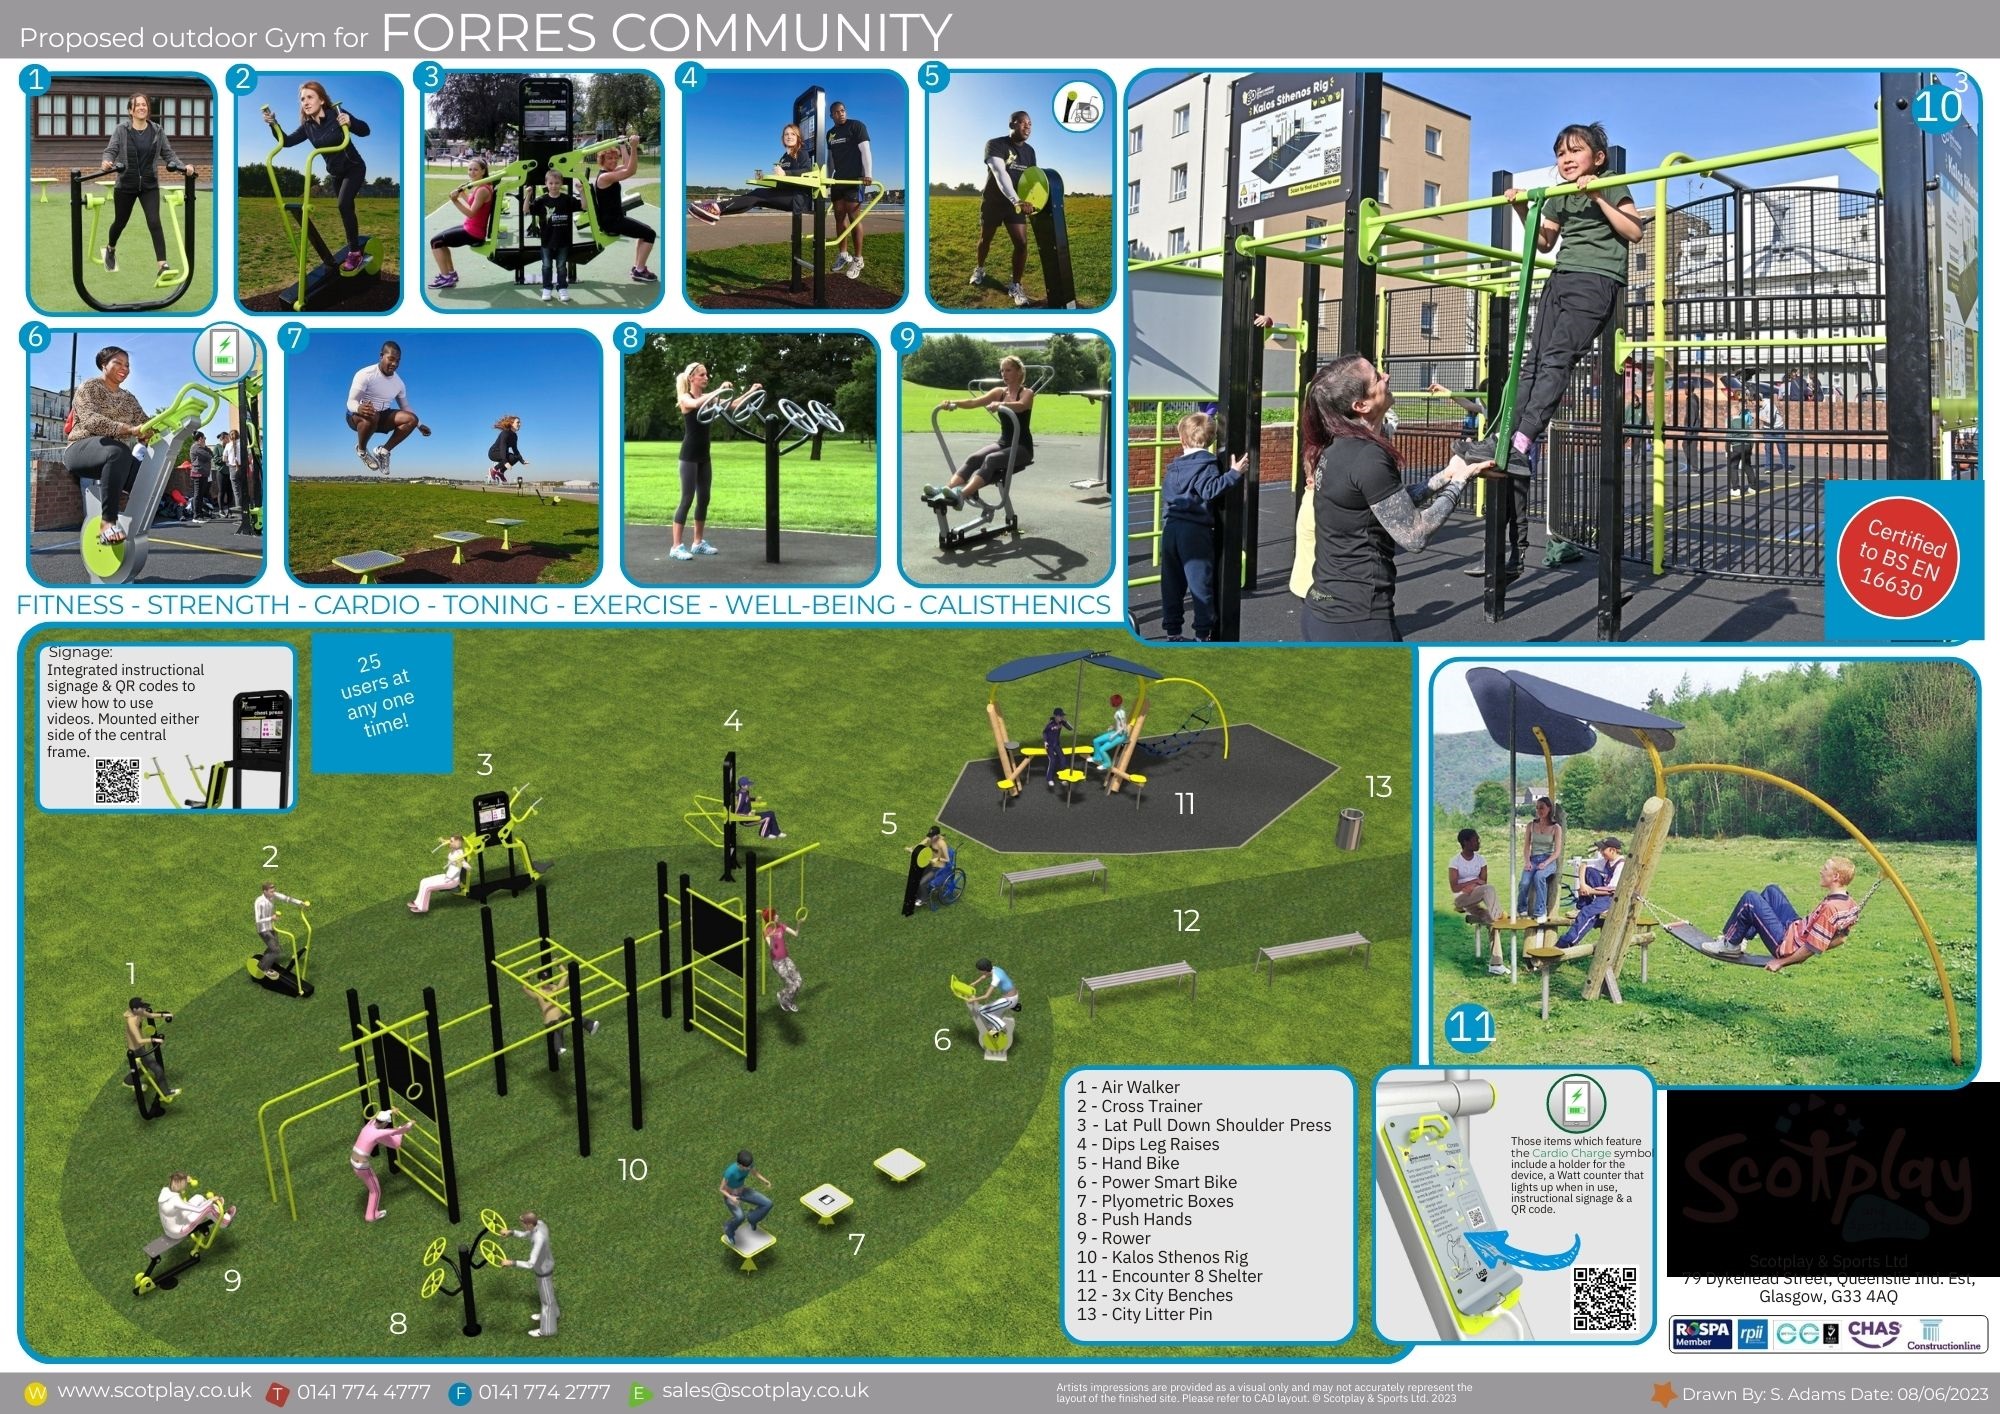 SCOTPLAY_Forres_Outdoor_Gym_Proposal.jpg